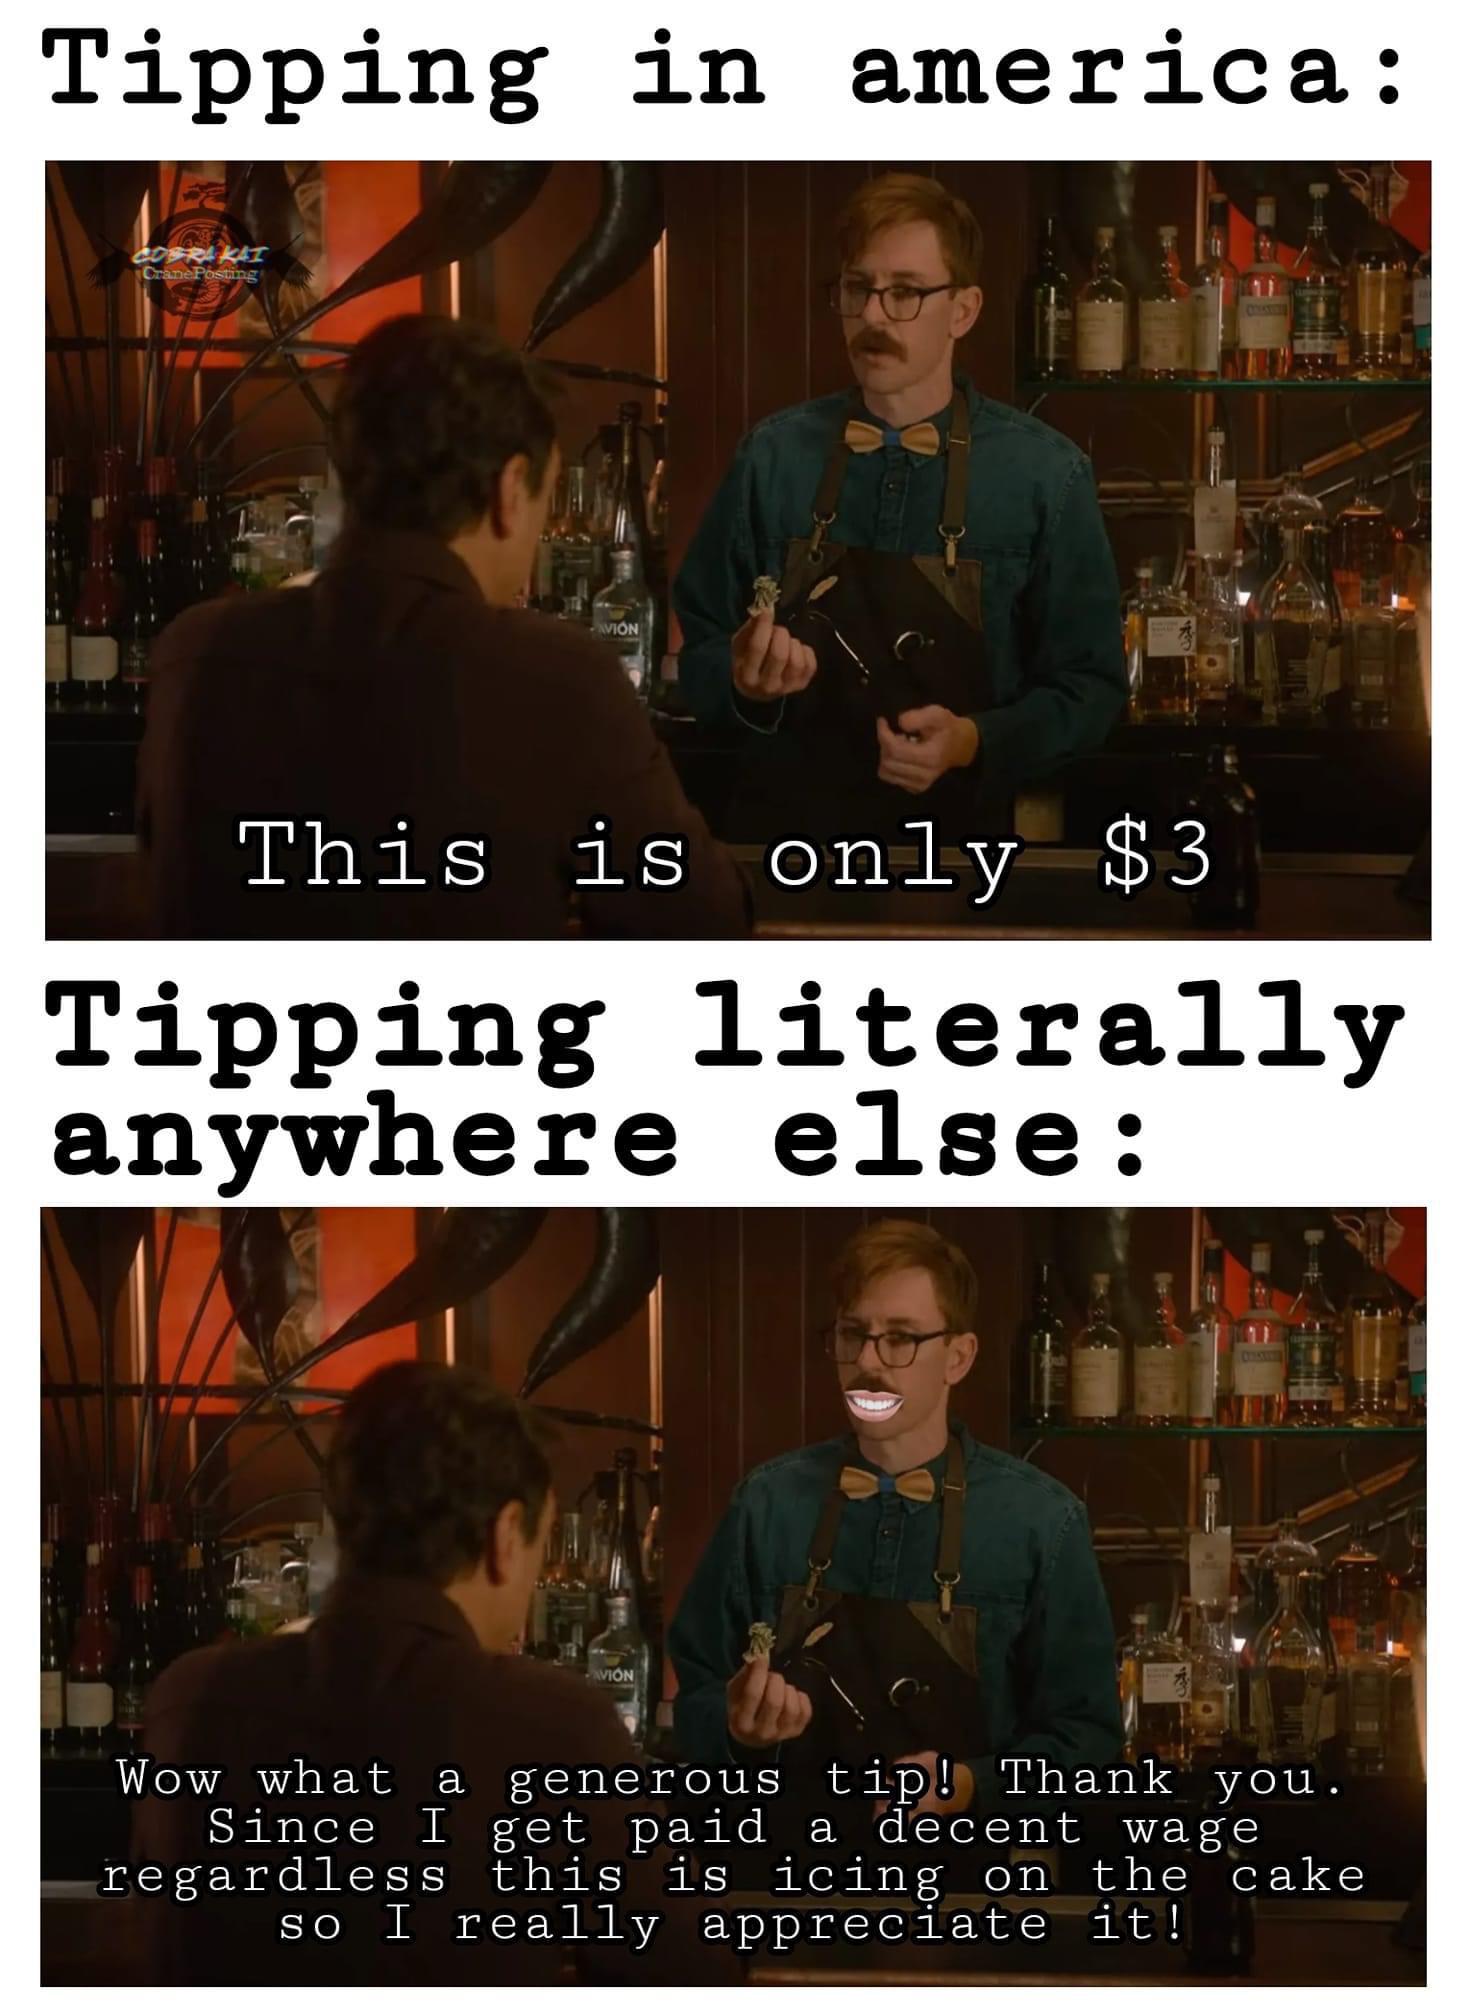 funny memes - dank memes - Tipping in america Drakat CranePosting Avion This is only $3 3 Tipping literally anywhere else Avion Wow what a generous tip! Thank you. Since I get paid a decent wage regardless this is icing on the cake so I really appreciate 